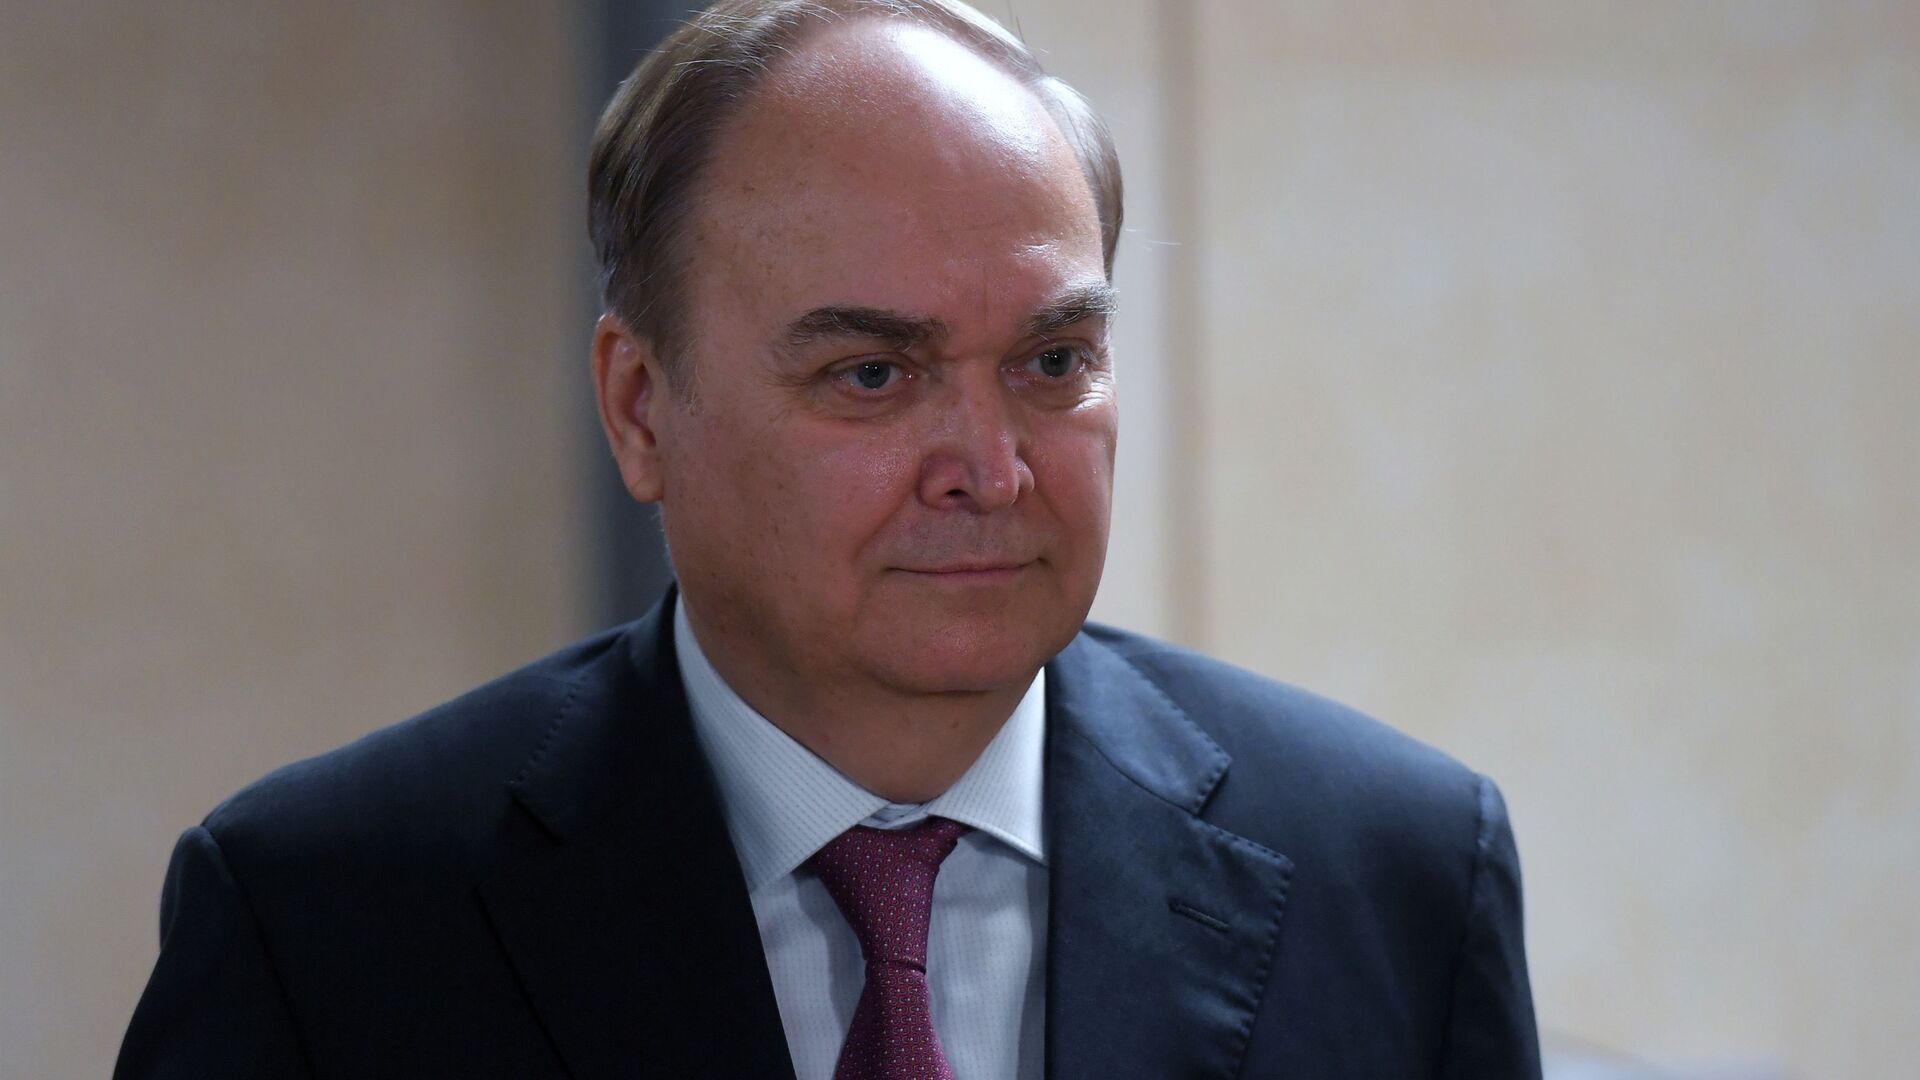 Ambassador Extraordinary and Plenipotentiary of the Russian Federation to the United States of America Anatoly Antonov during a briefing at the State Duma of the Russian Federation in Moscow. - Sputnik International, 1920, 09.04.2022